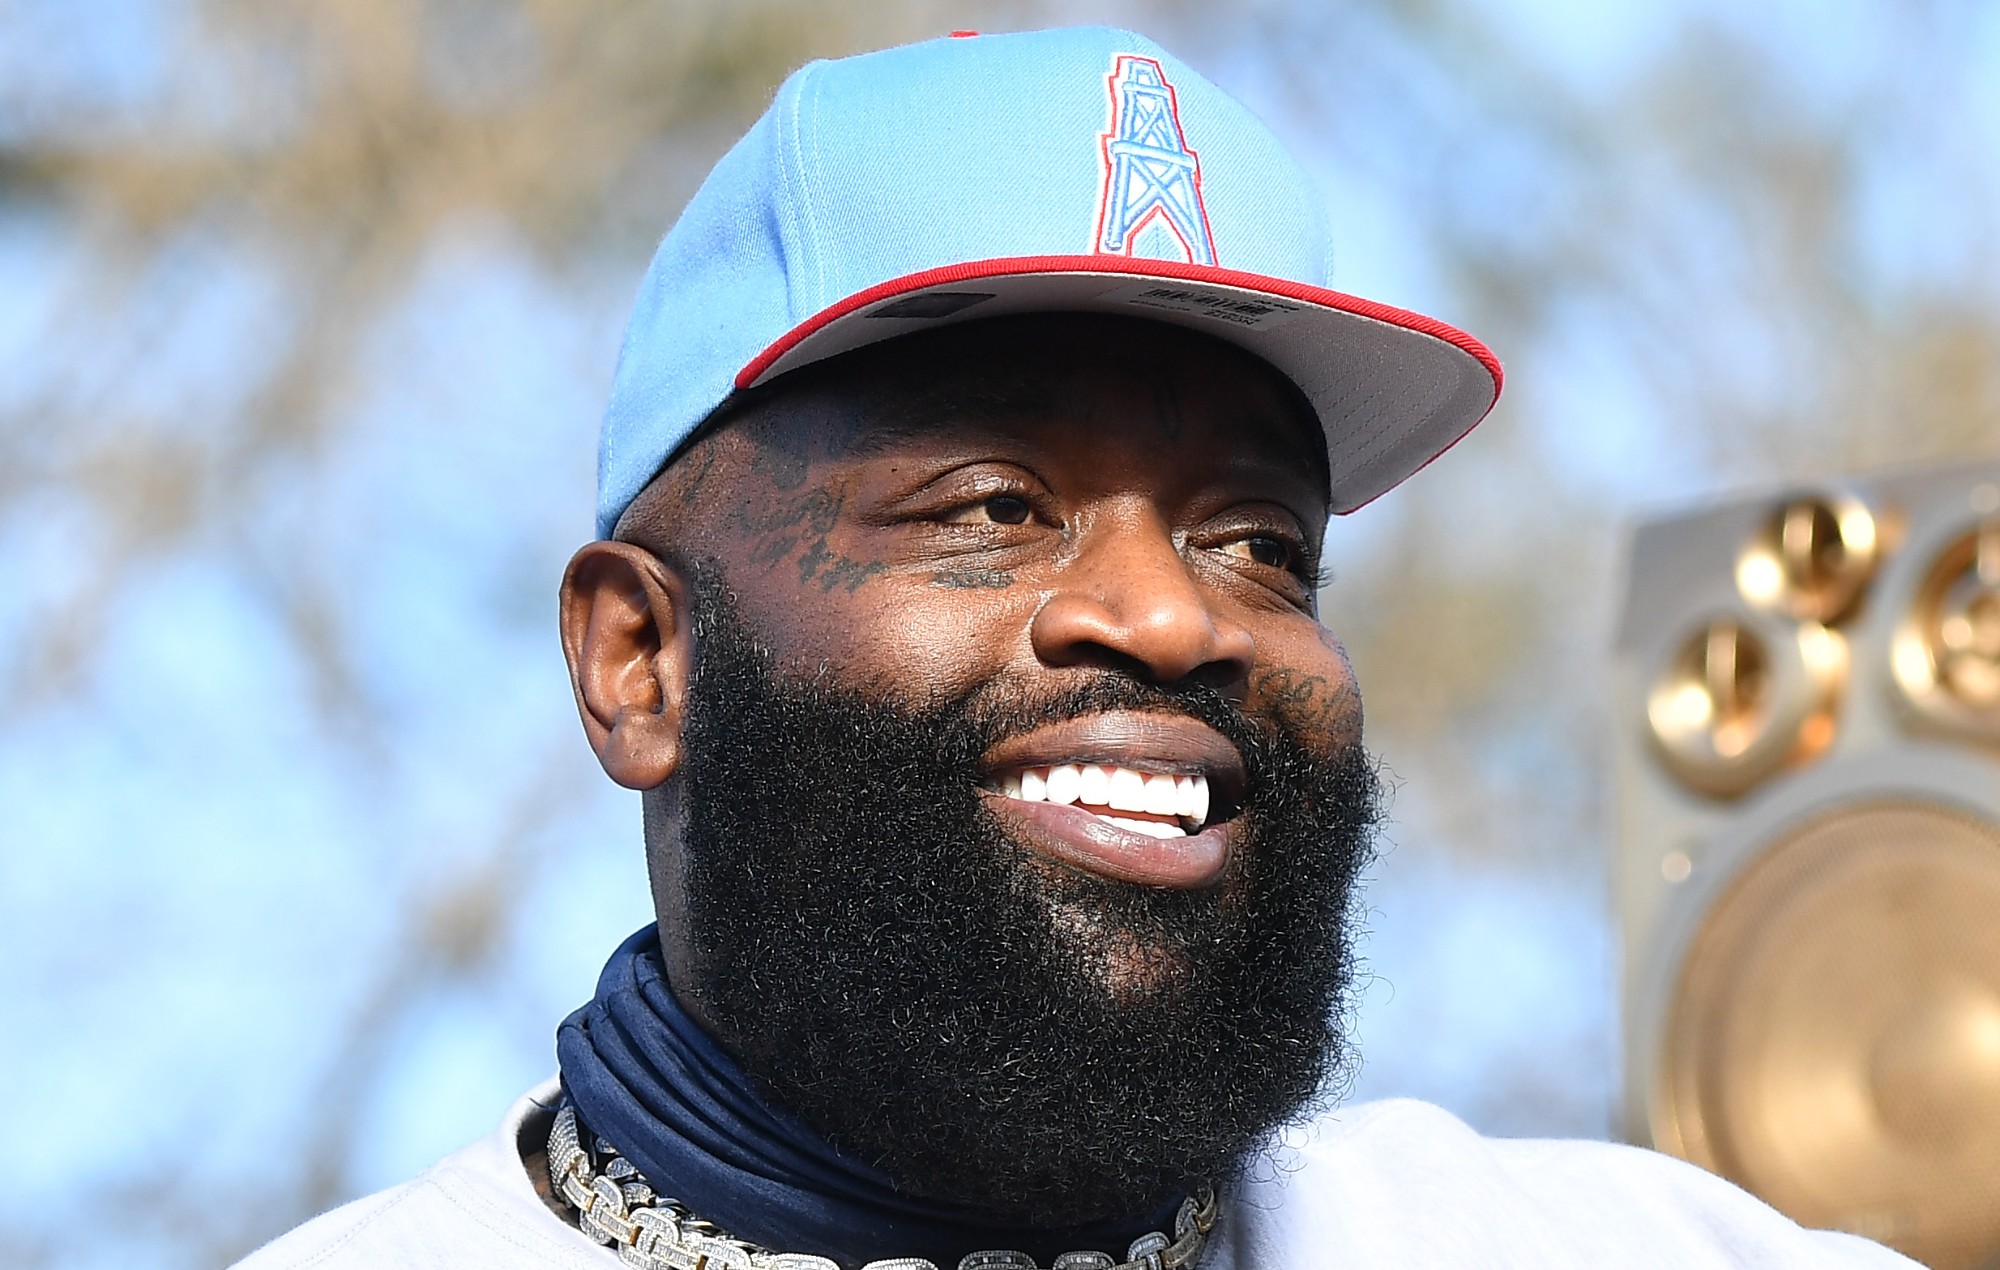 RICK ROSS SAVES A TORTOISE WHILE MOWING HIS LAWN, BUT DID HE KILL IT BY ACCIDENT?